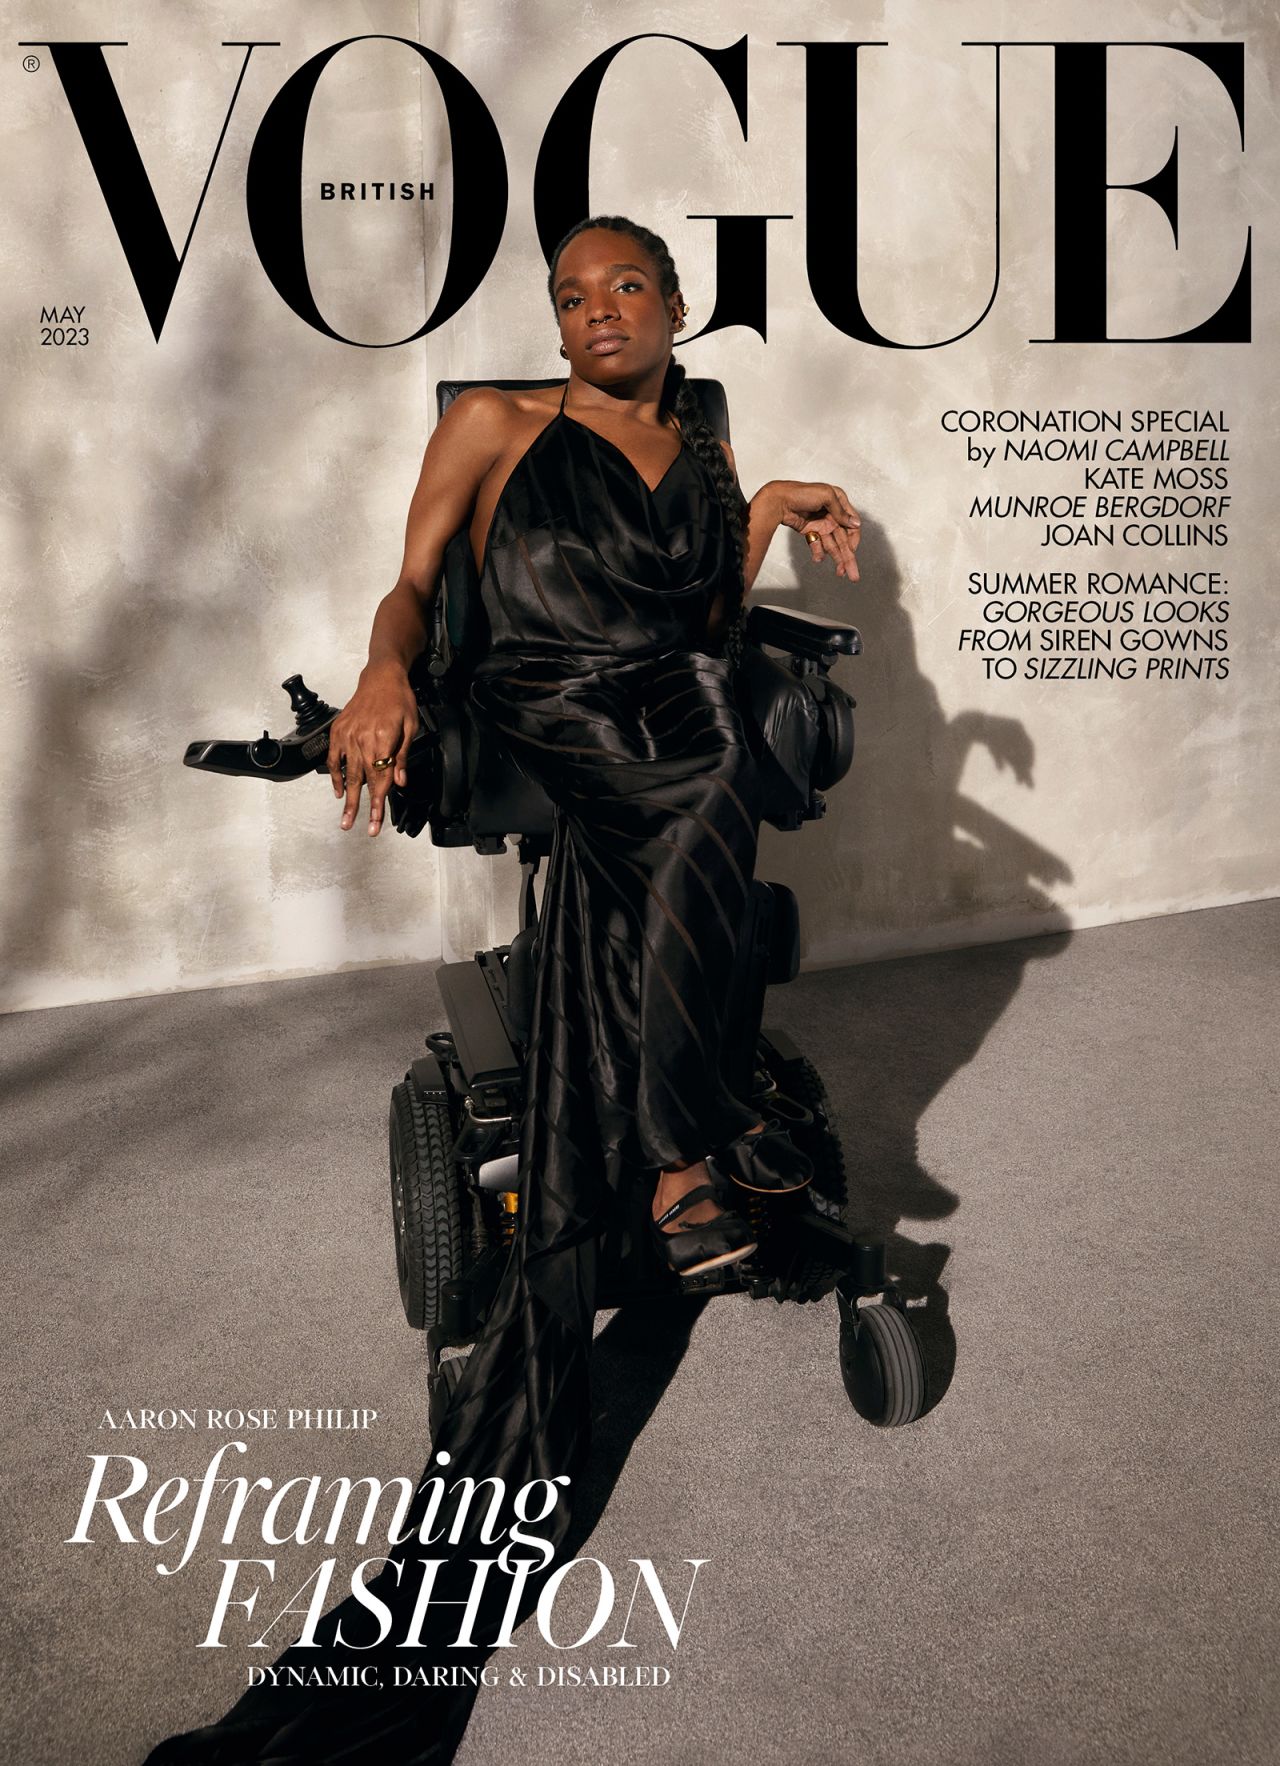 Black transgender model and power wheelchair user Aaron Rose Philip was the first physically disabled model to be represented by a major agency in 2018.